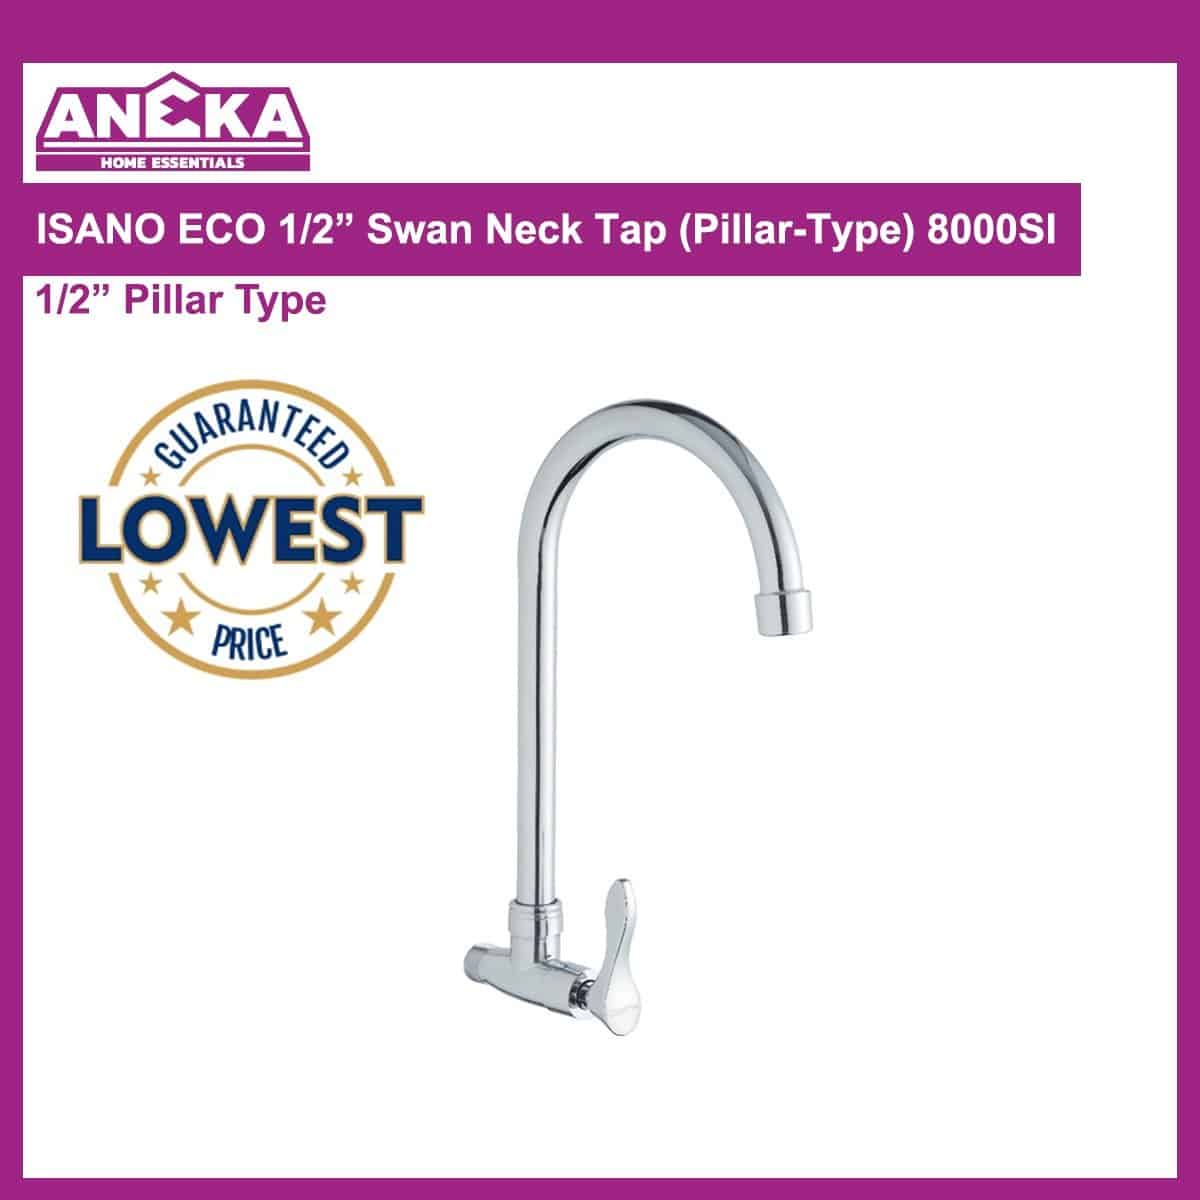 ISANO ECO 1/2" Swan Neck Tap (Wall-Type) 8000SS